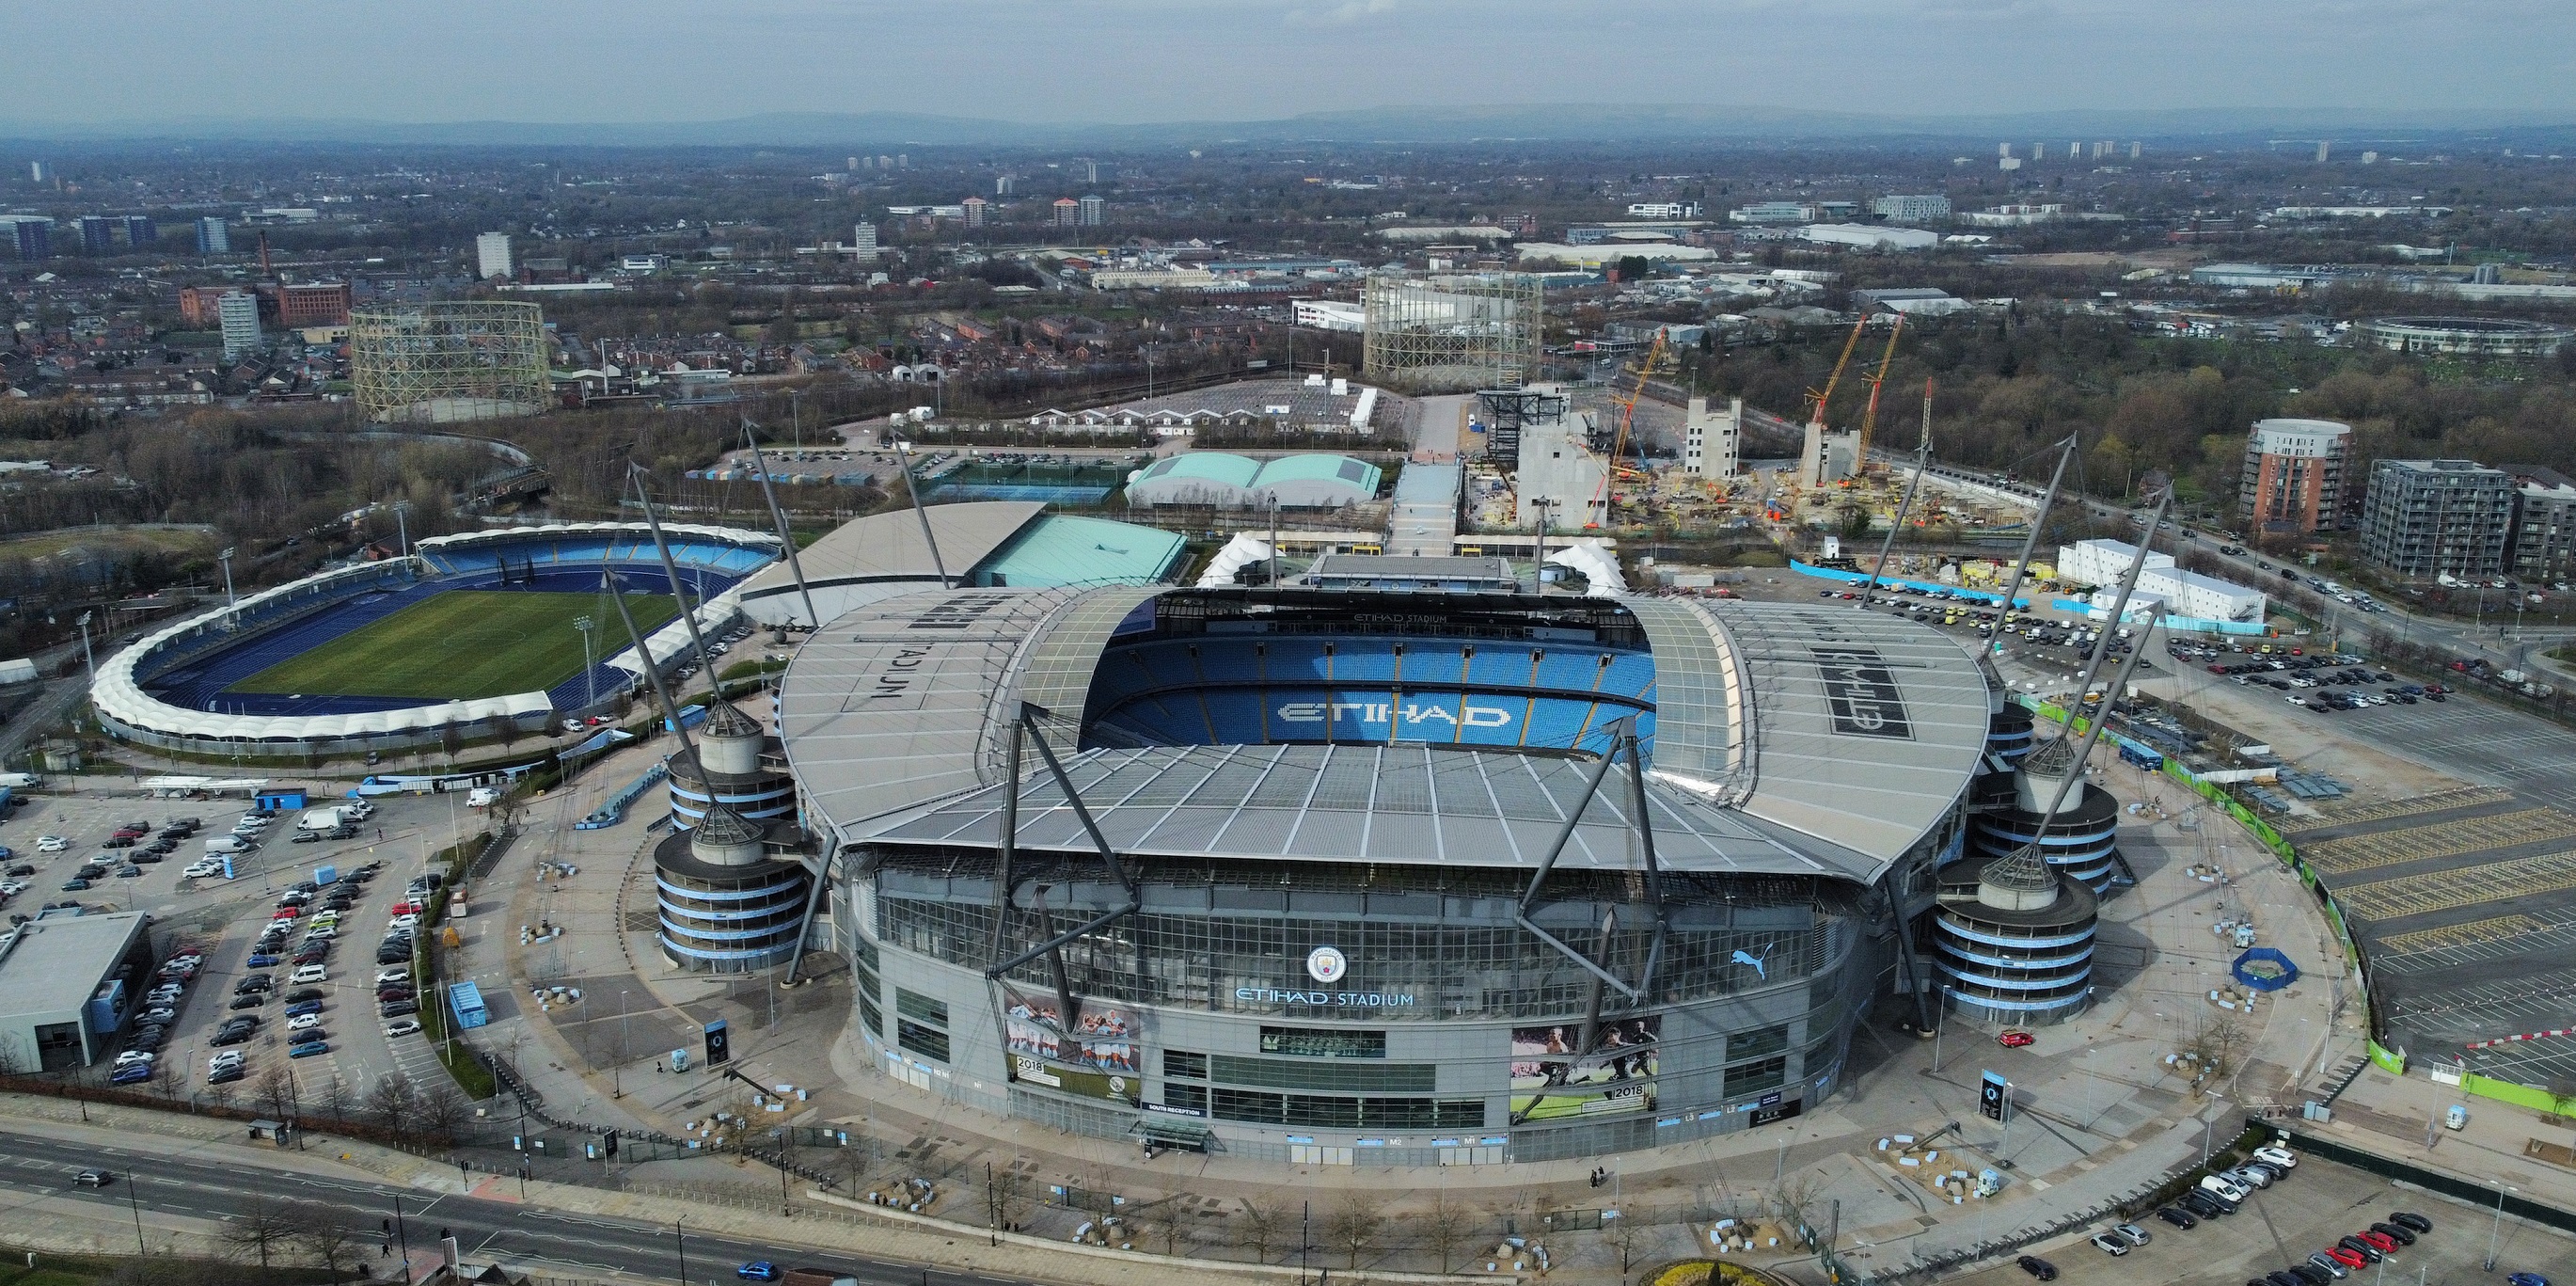 Liverpool fans will be far from pleased with lowered ticket allocation for crunch Man City title clash at the Etihad